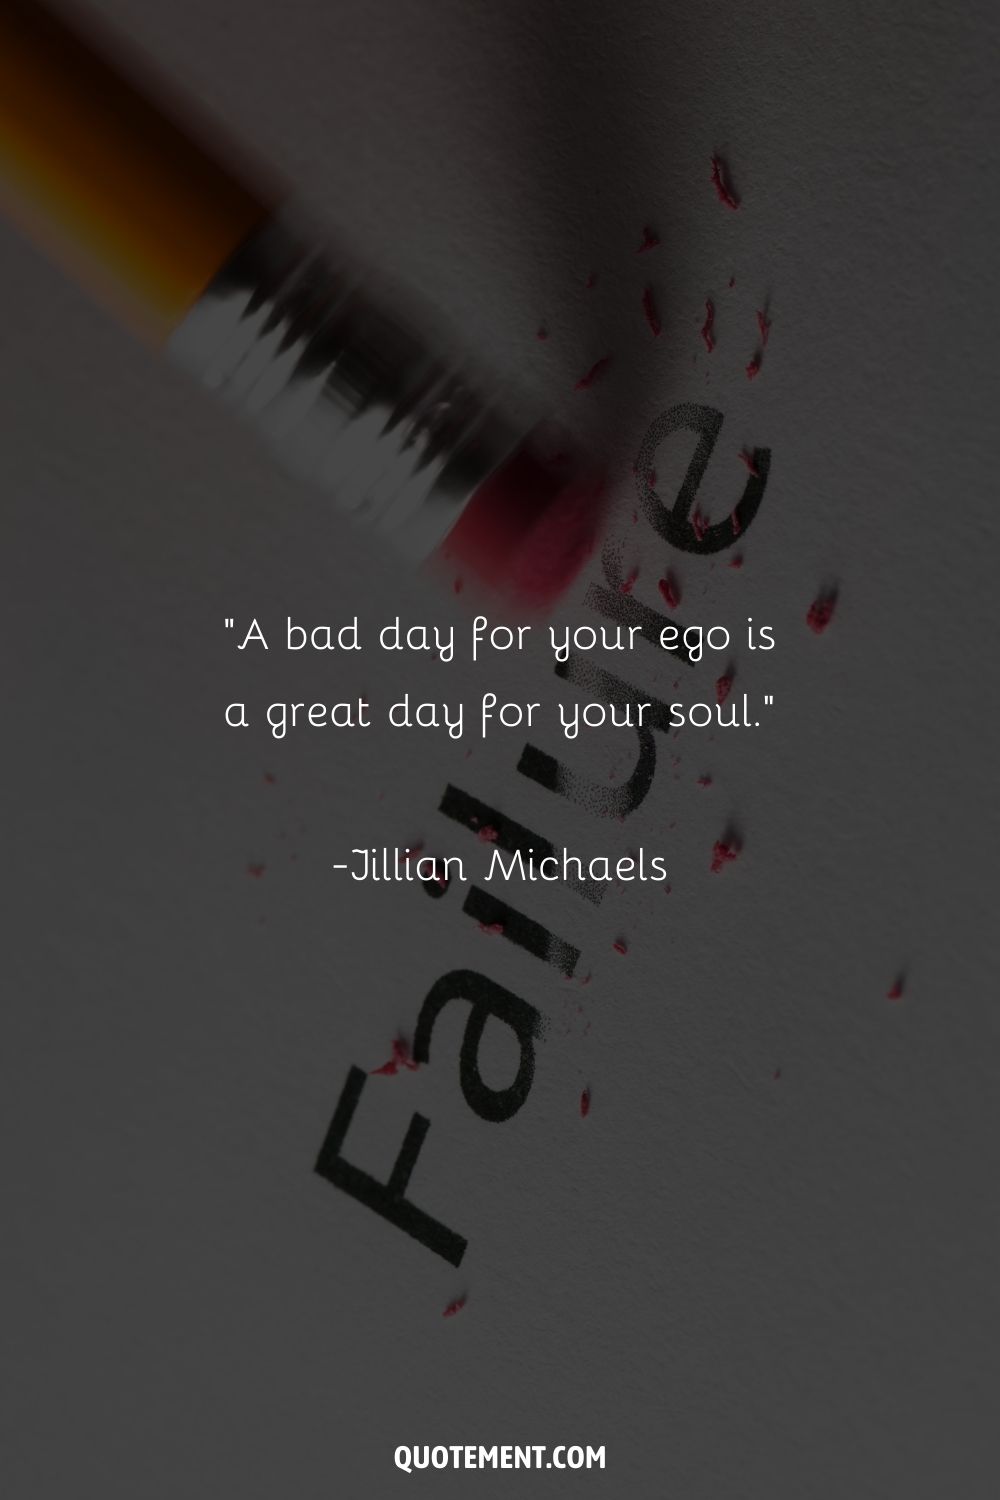 “A bad day for your ego is a great day for your soul.” ― Jillian Michaels, Master Your Metabolism